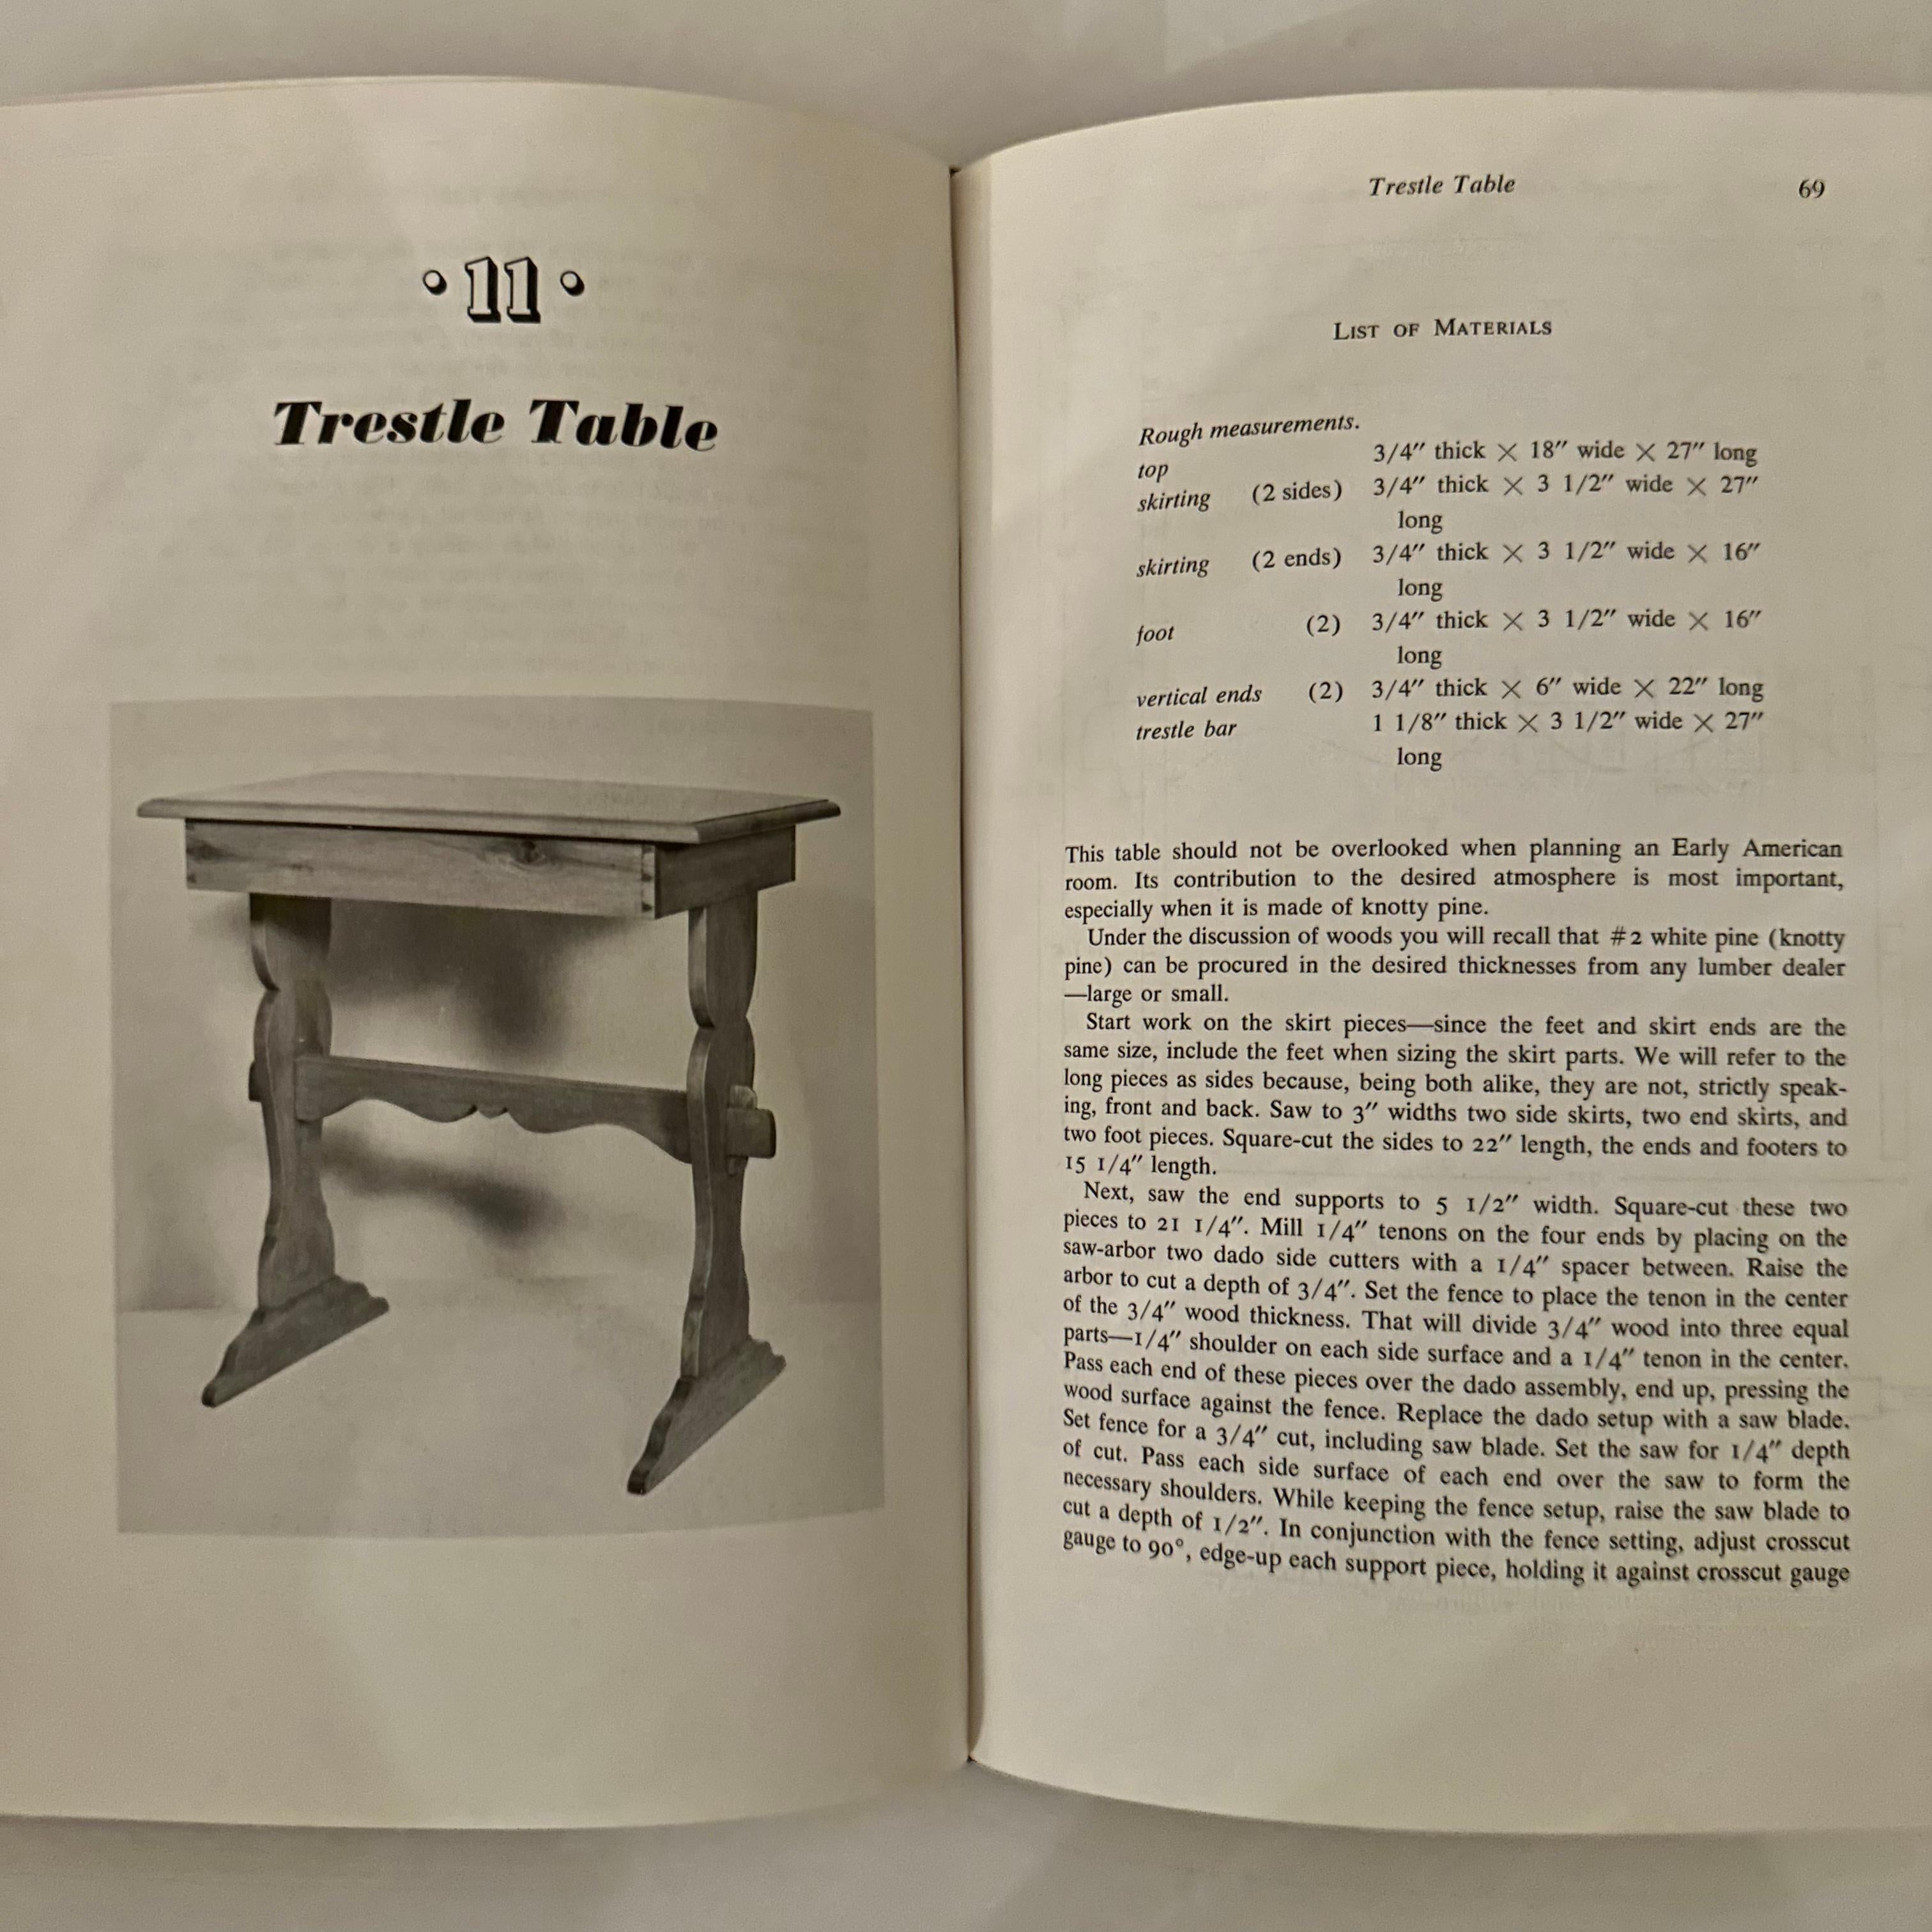 Published by Macmillan Publishing Co., Inc., 1st edition 3rd printing, New York, 1974. Hardback with English text.

The ideal step-by-step handbook for casual hobbyists who love a sturdy and good-looking piece of American furniture. Without the